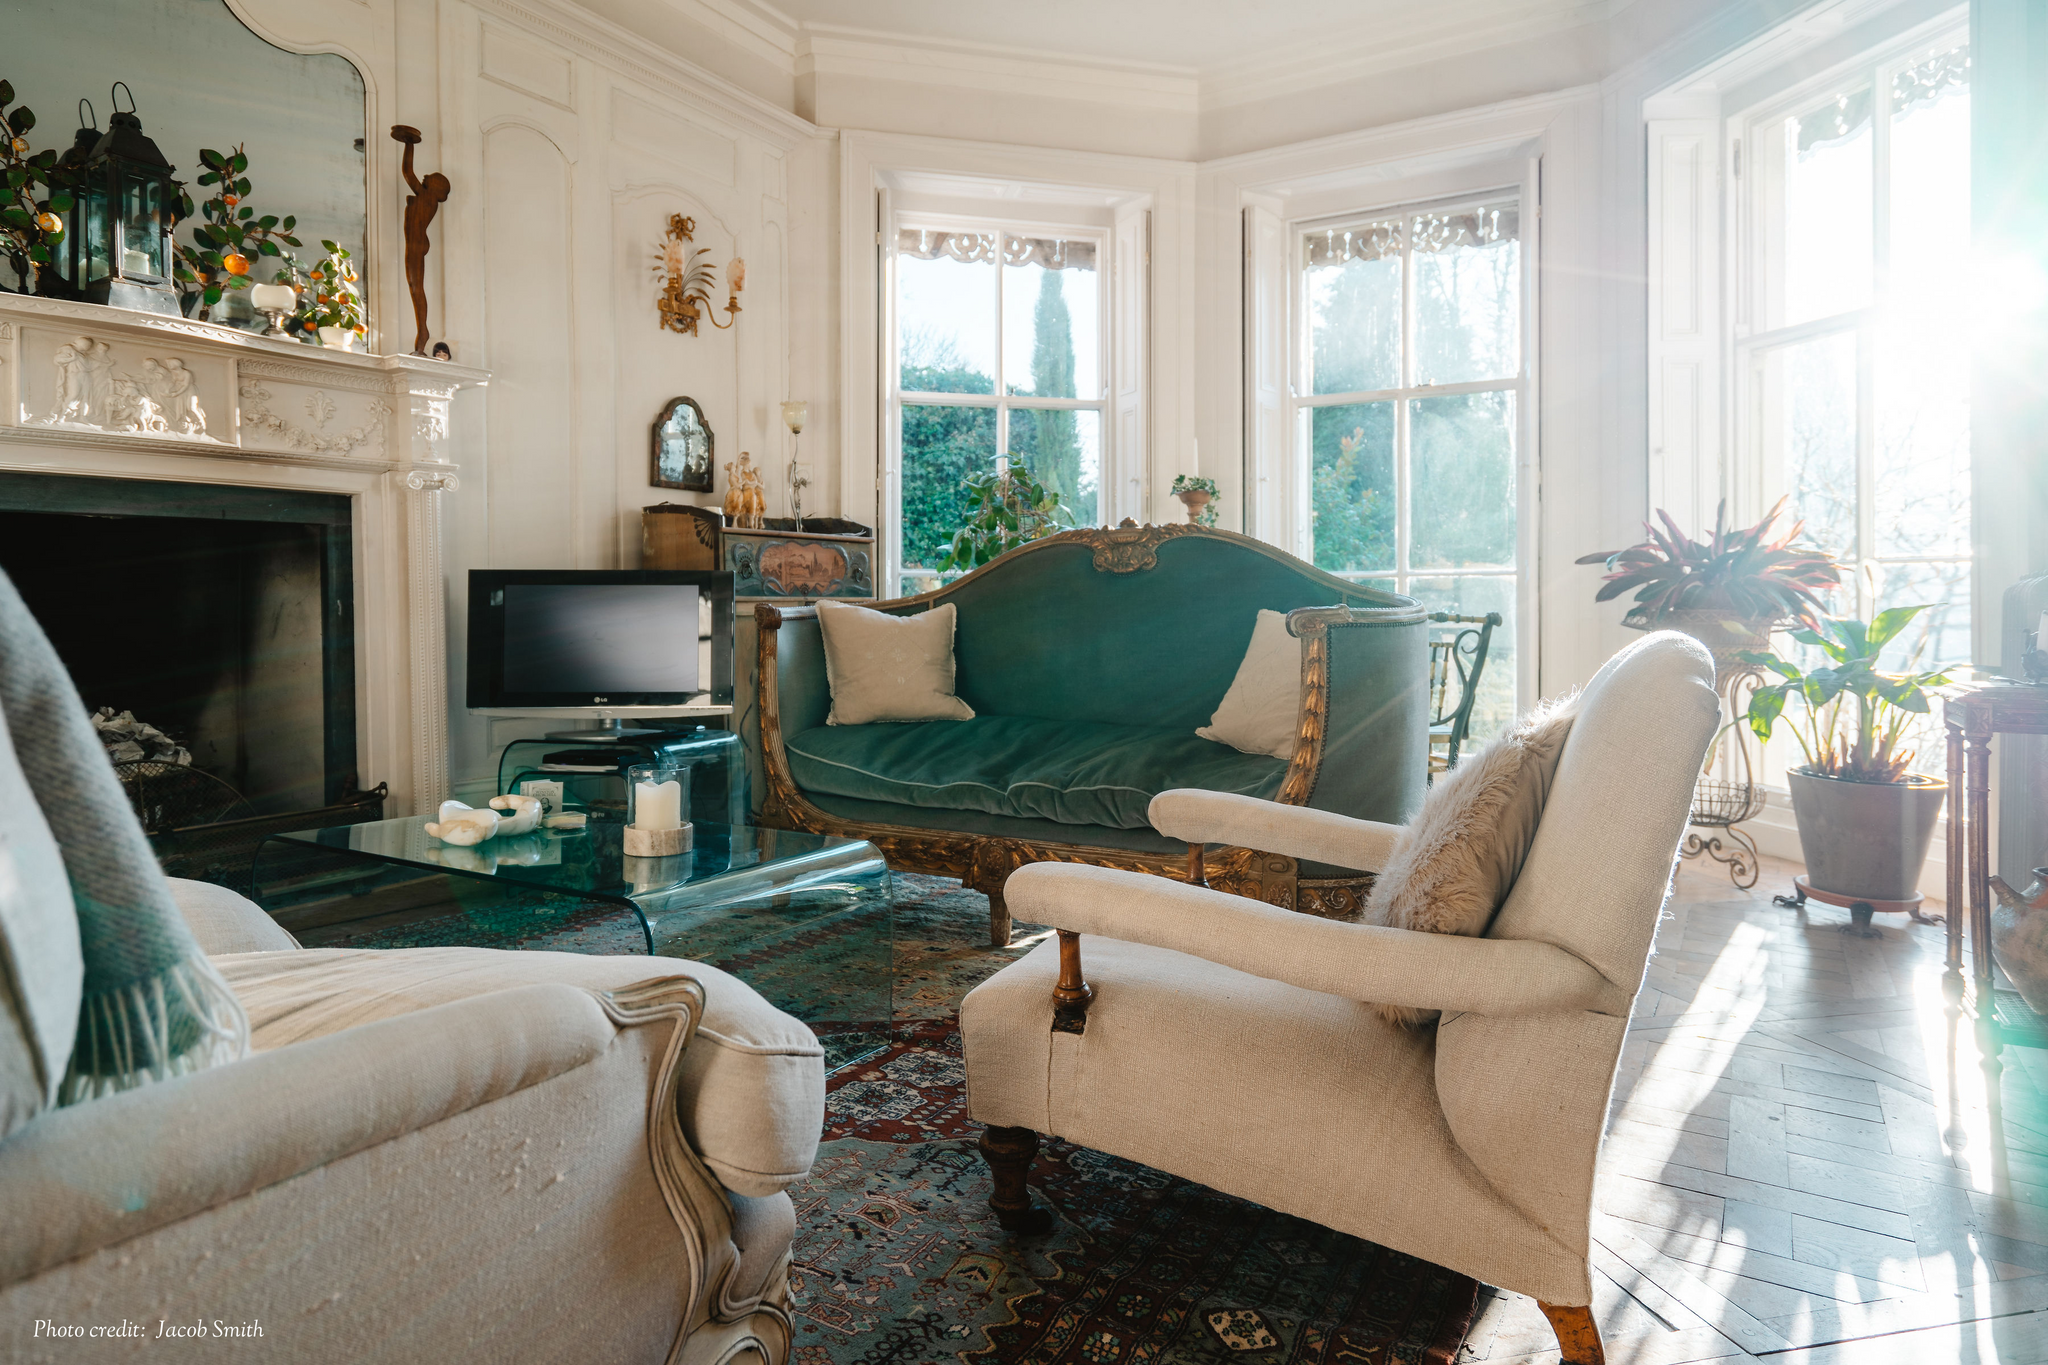 The French House Blog - 6 ways to add French style to your home